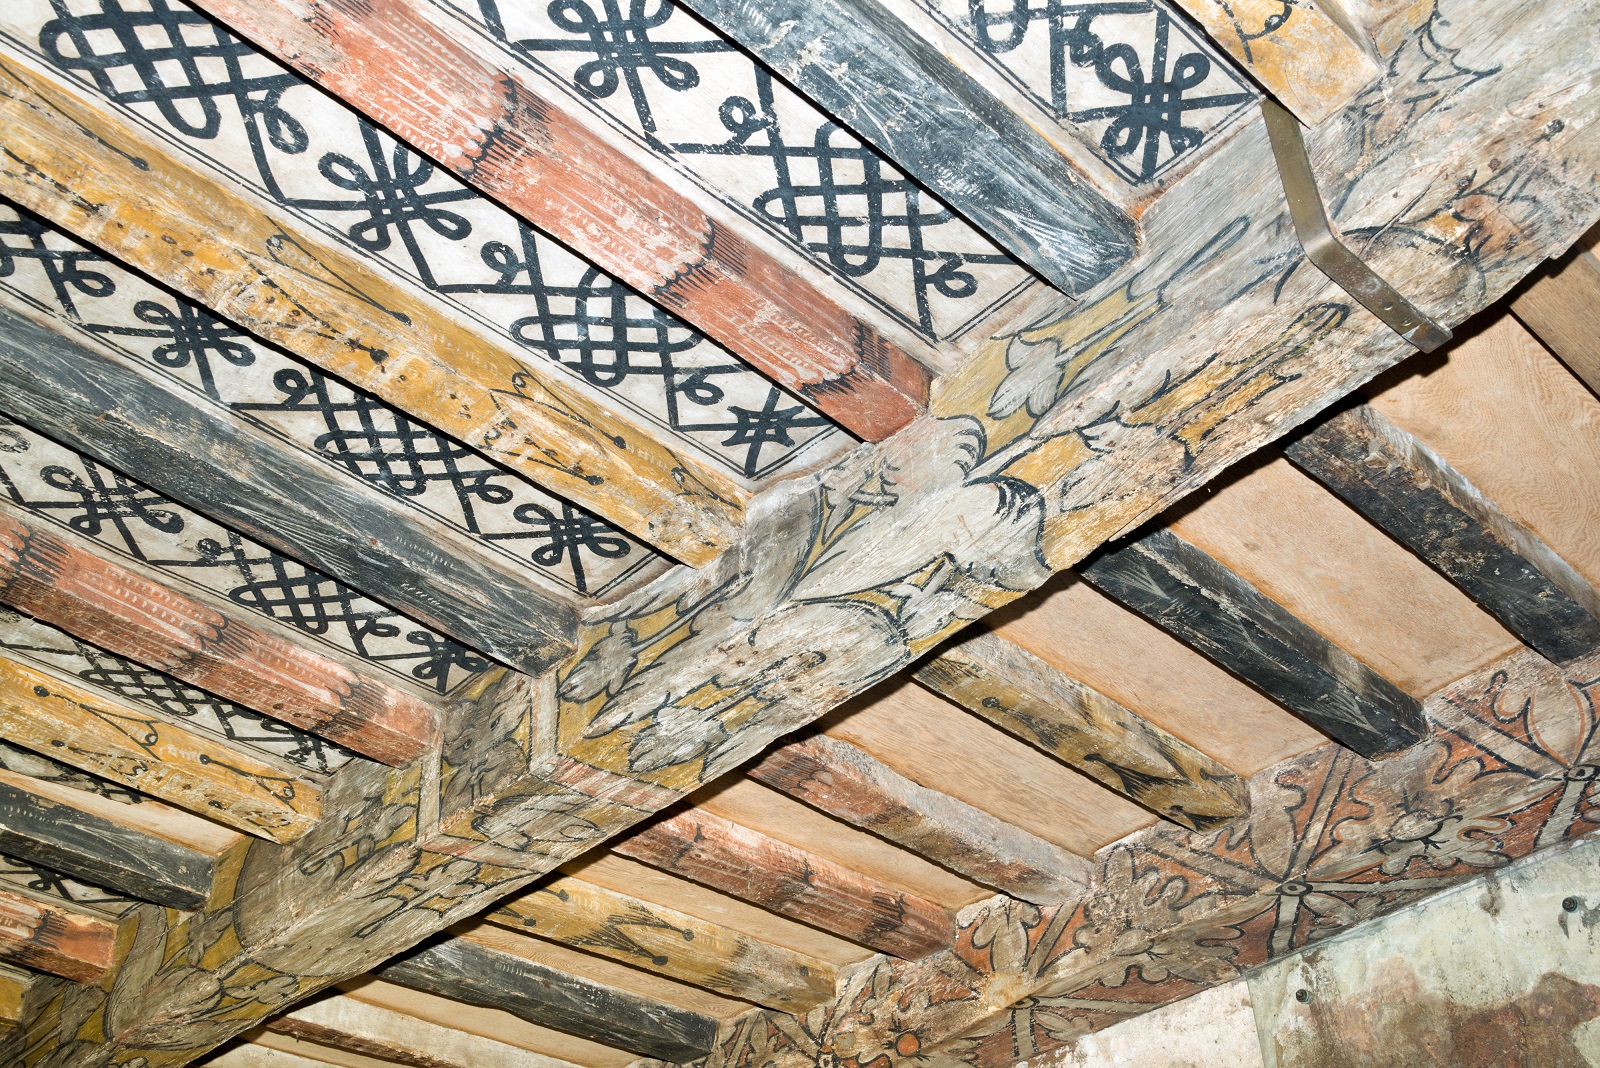 The painted ceiling at Huntingtower Castle